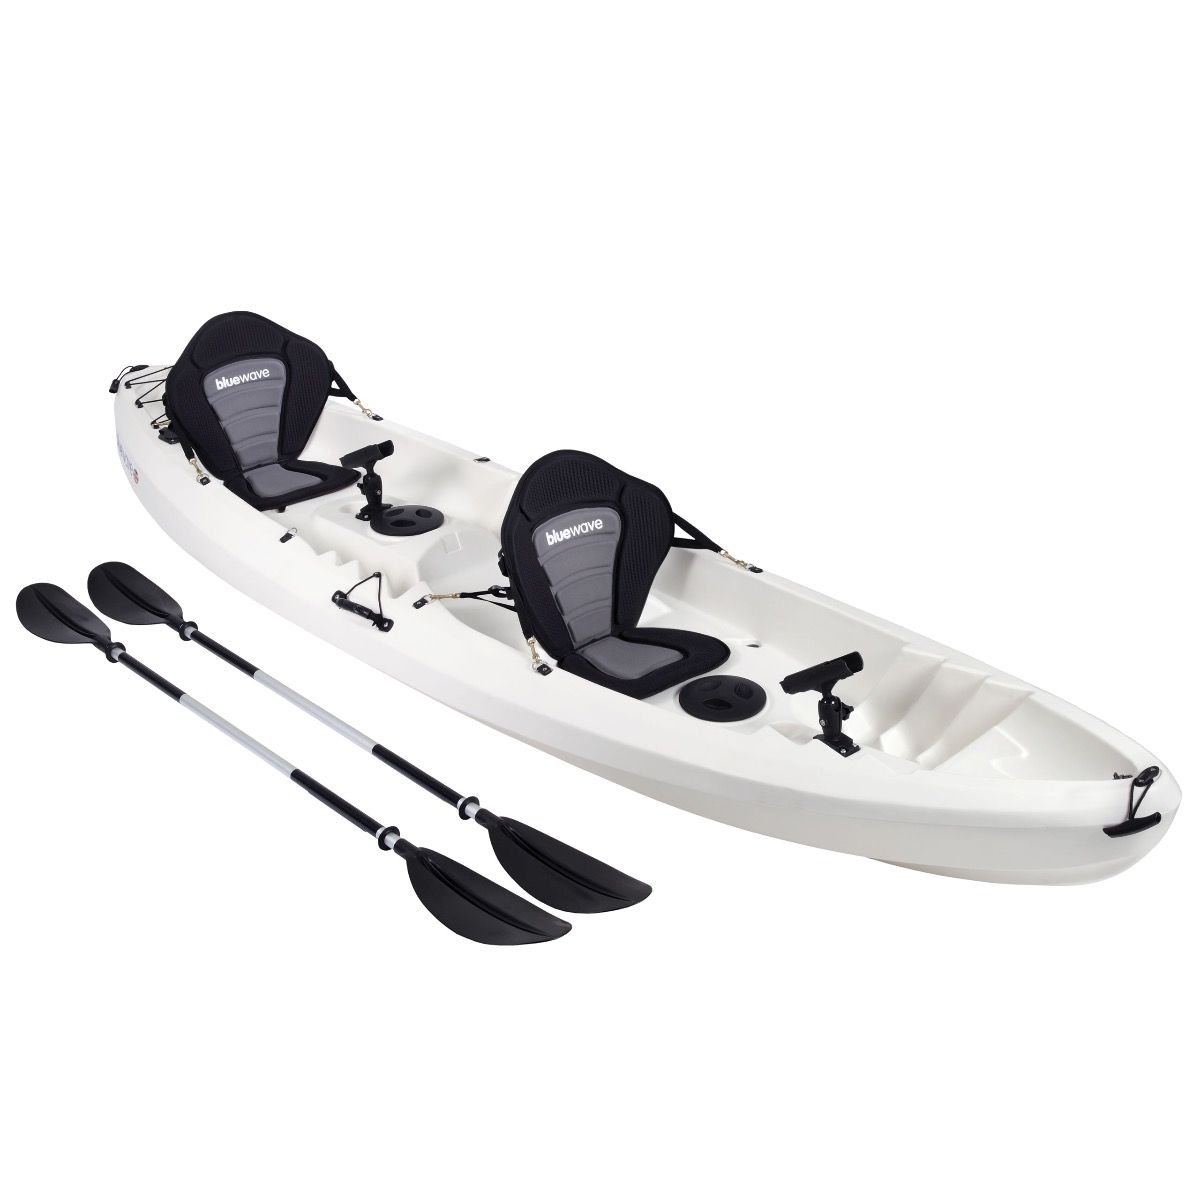 Bluewave Convoy Double Sit On Top Kayak Package - Perfect for Tandem  Paddling and Fishing - Includes Paddles and Comfortable Seats - Buy Online  Now!